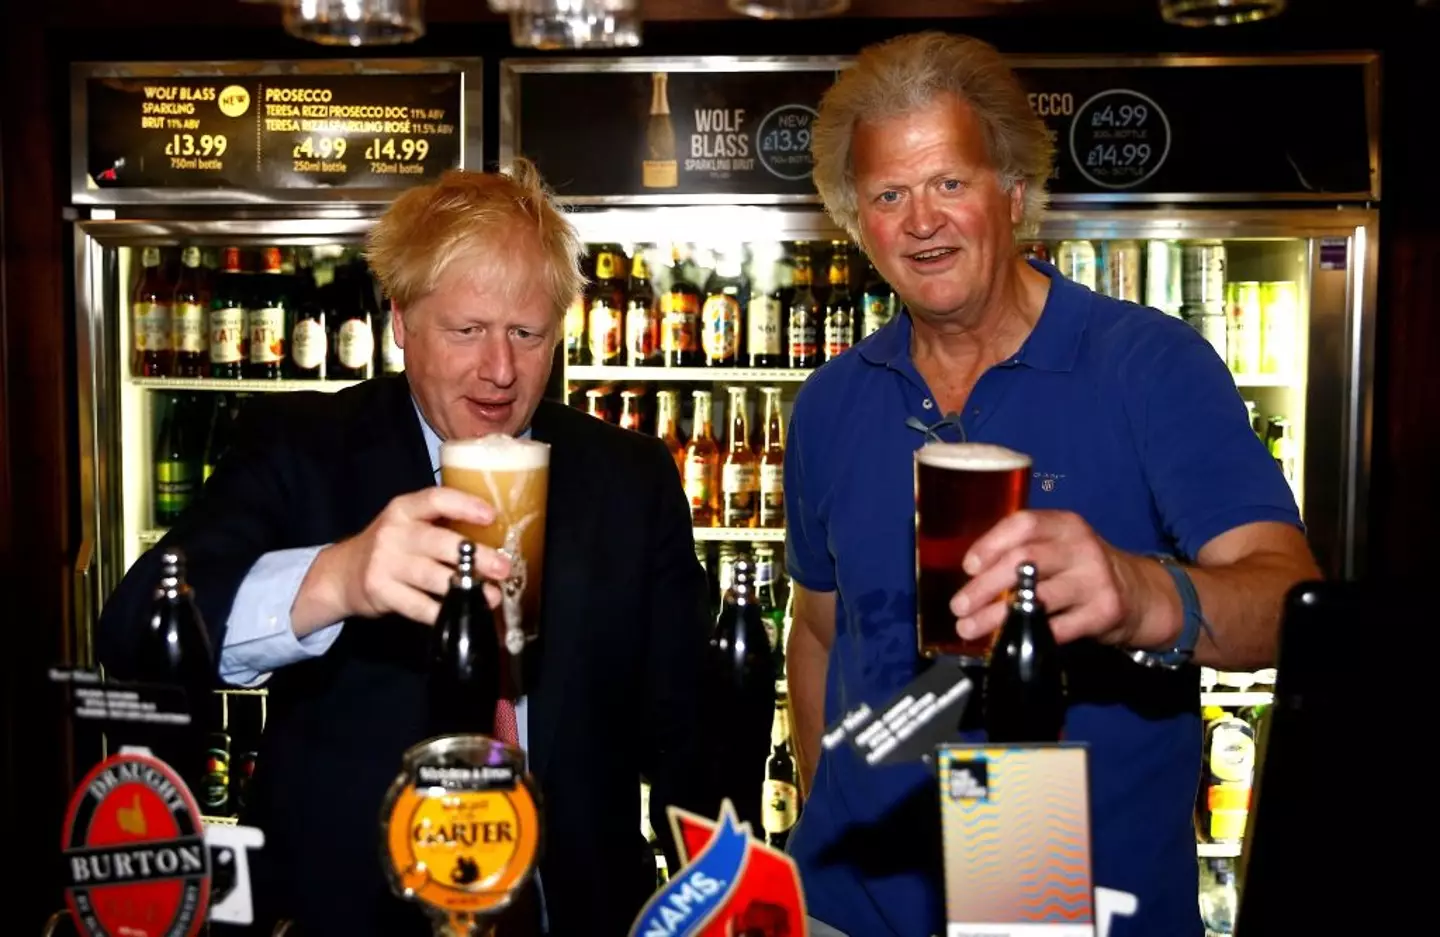 People aren't happy that Wetherspoon boss Tim Martin is on the New Year's Honours list.